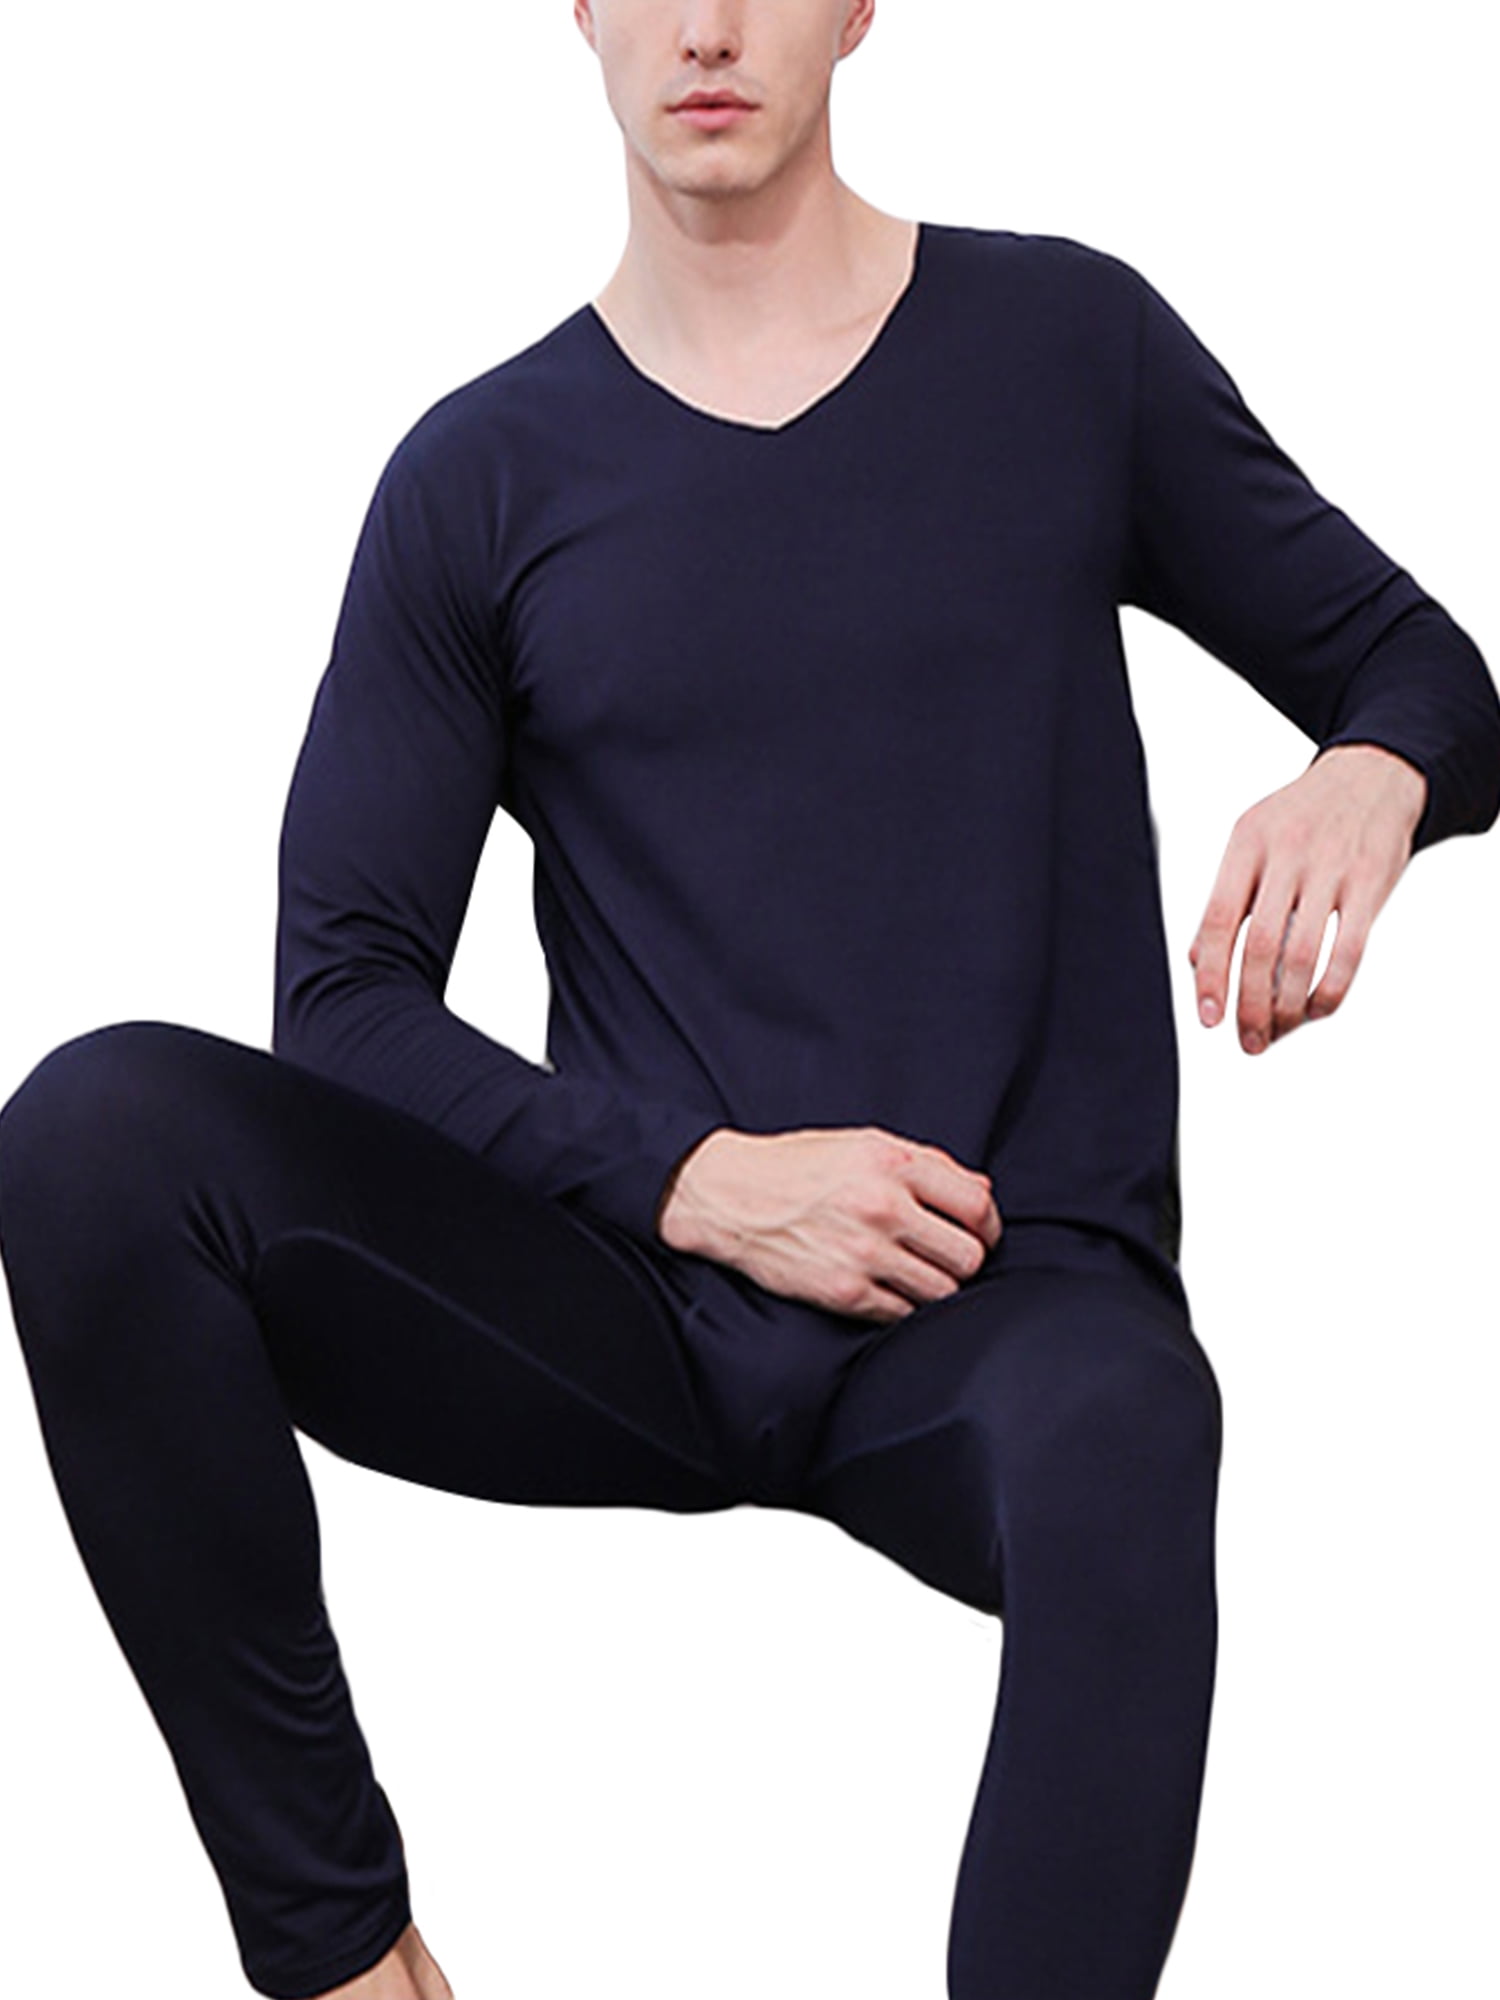 AMERICAN ACTIVE Men's Long Johns Thermal Base Layer Pants 100% Cotton Fleece Lined Underwear Pack of 3